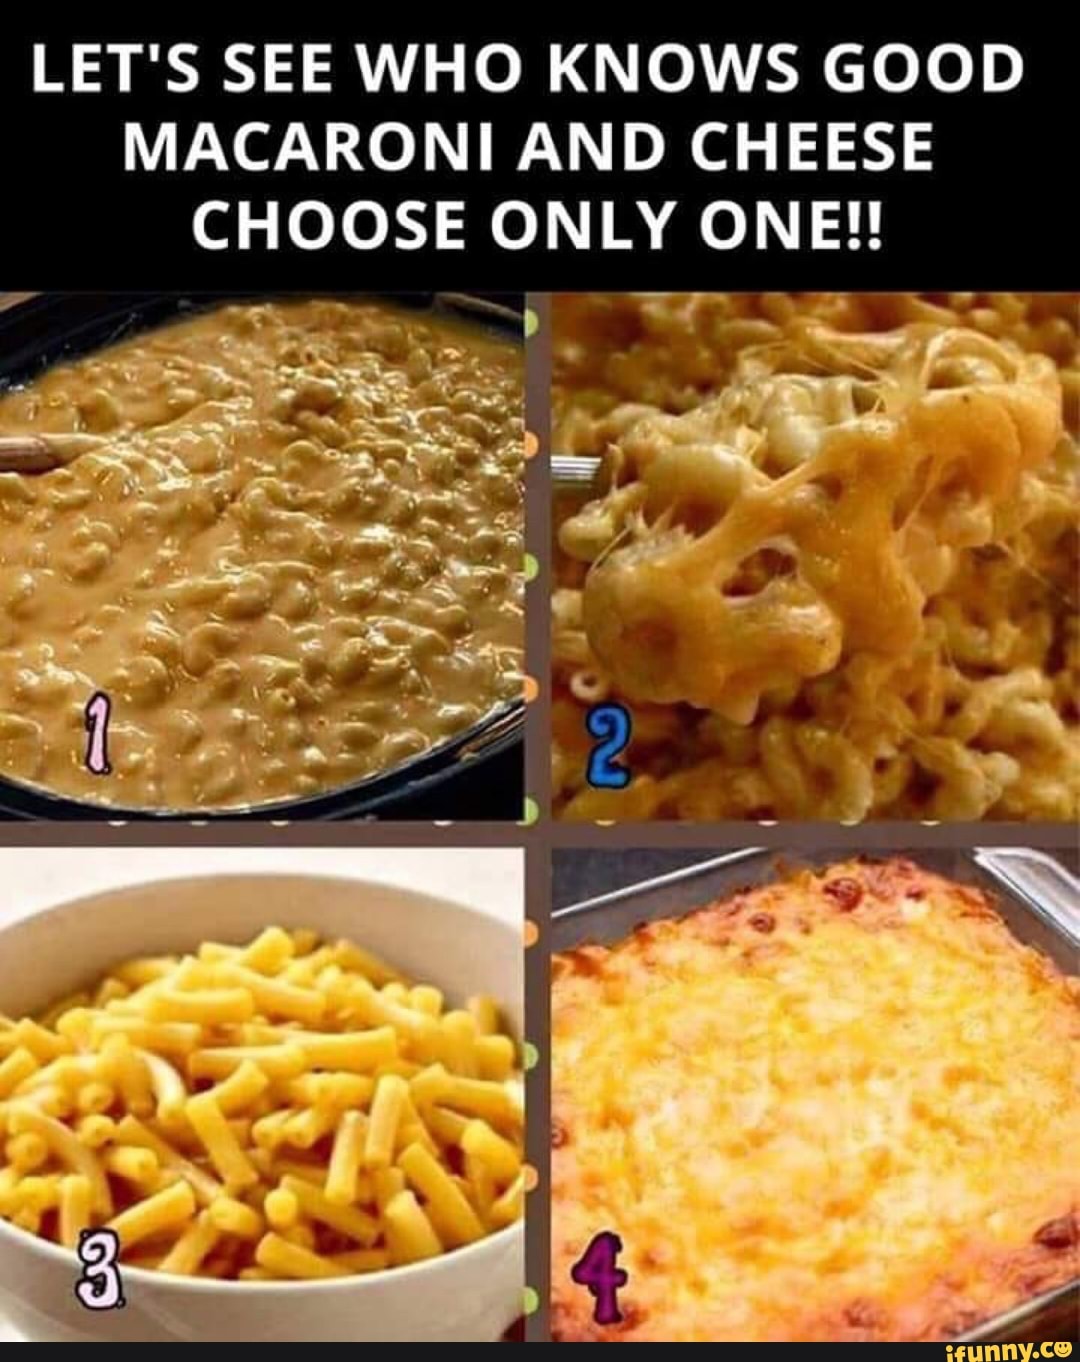 Let's see who knows good macaroni and cheese.